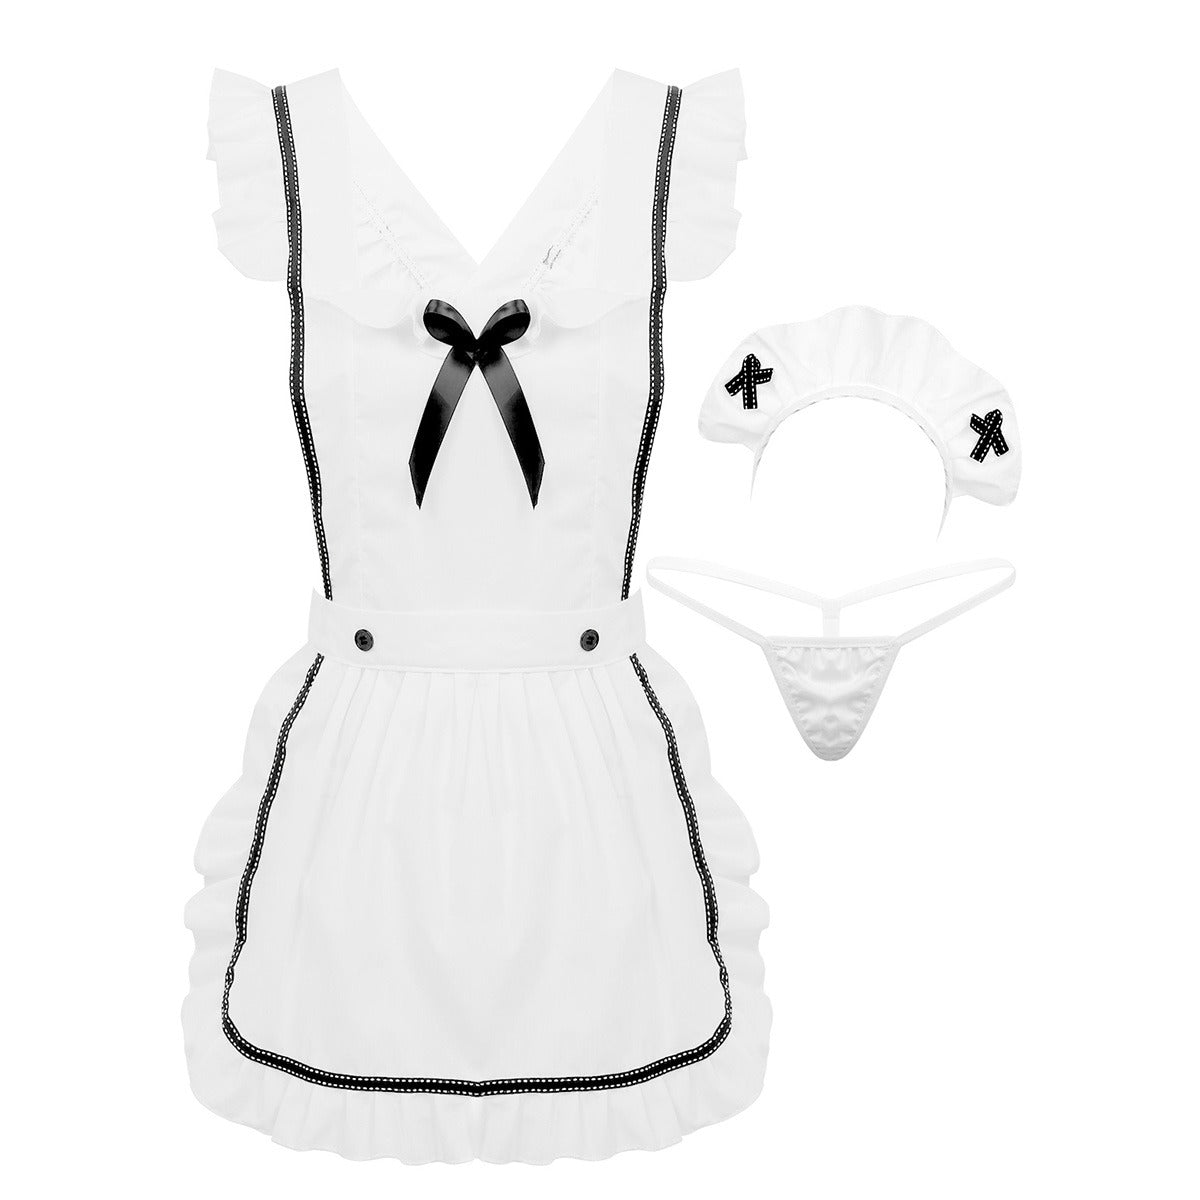 Cosplay Sexy Costume With G-String / Hot Erotic Maid Fancy Dress / Women's Retro Apron Lingerie - HARD'N'HEAVY